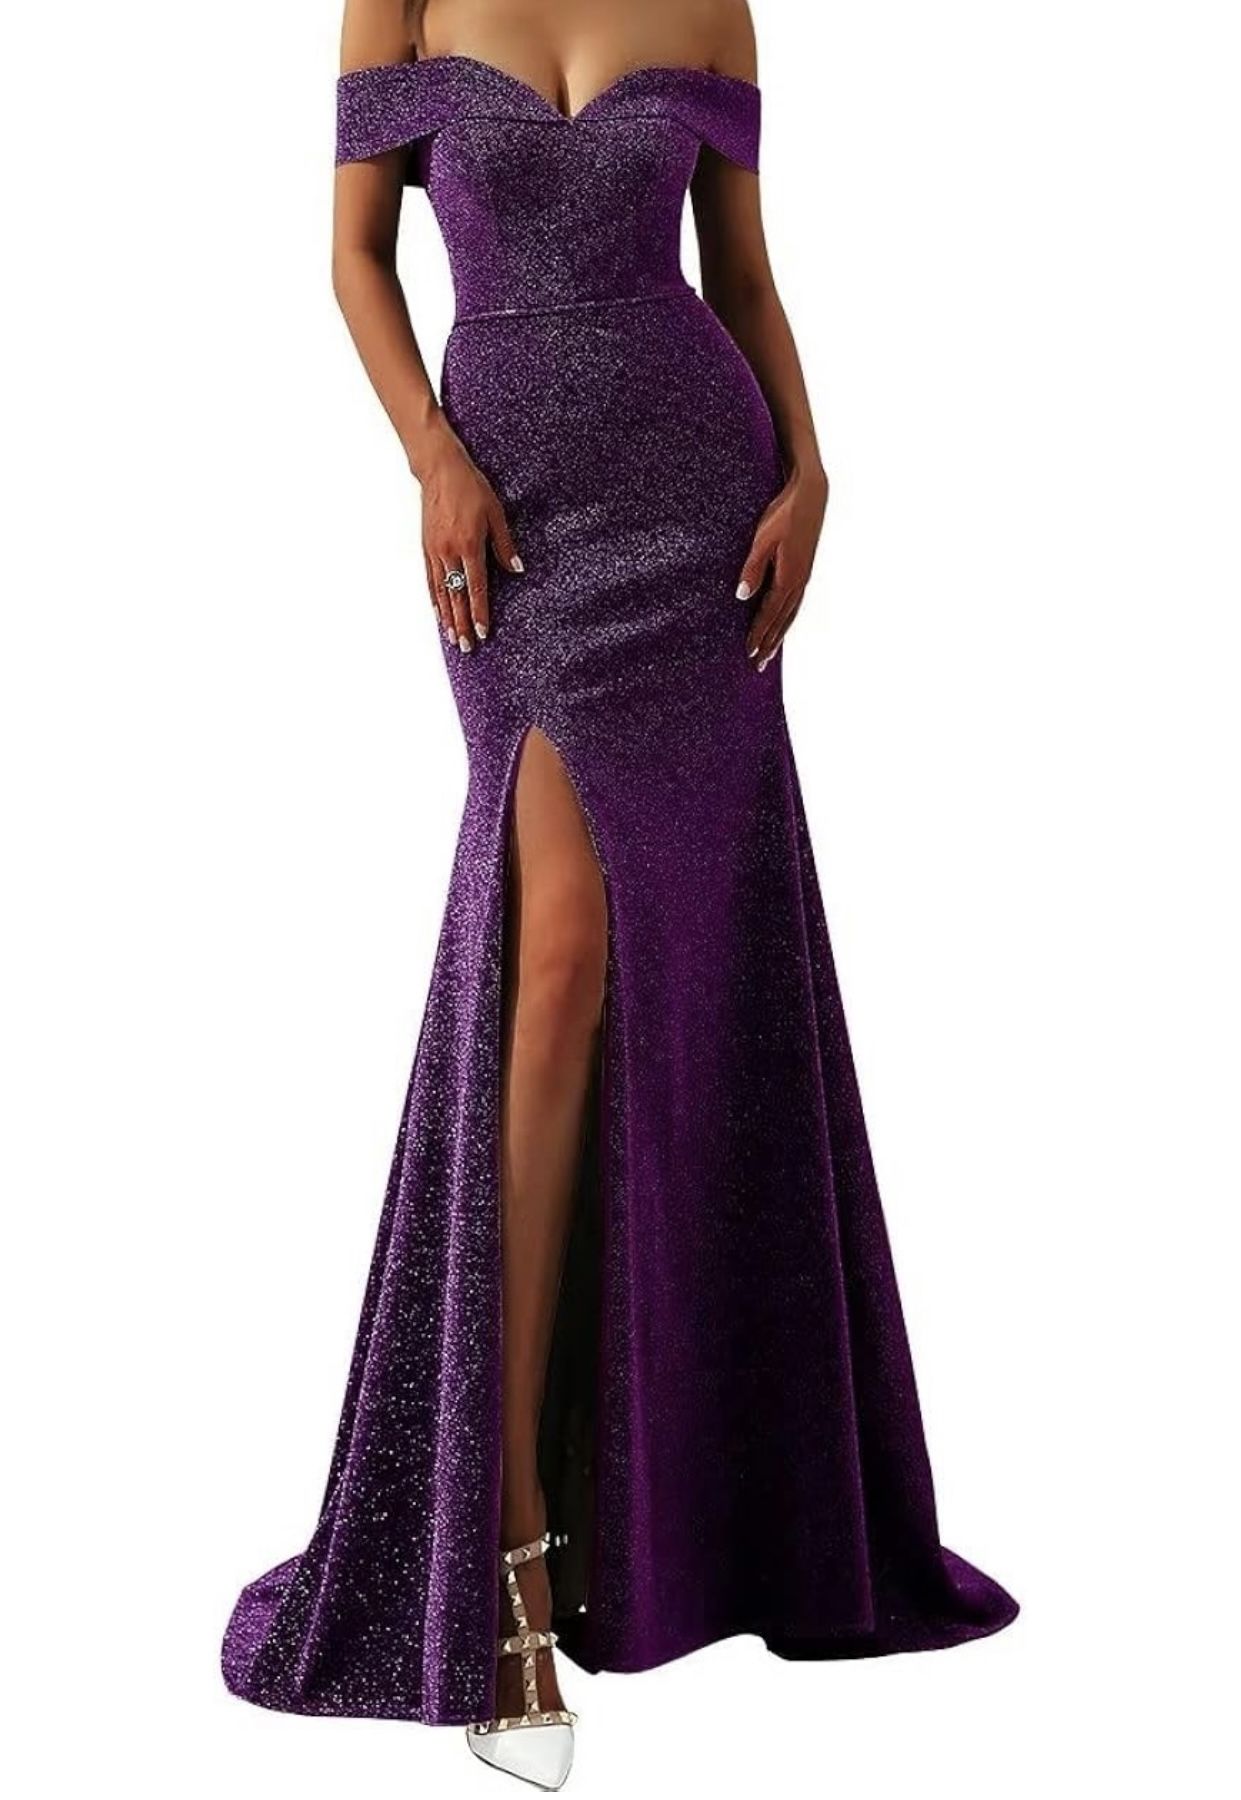 Purple Dress Can Be Worn For Gala, Wedding Guest, Party, Prom, HOCO 